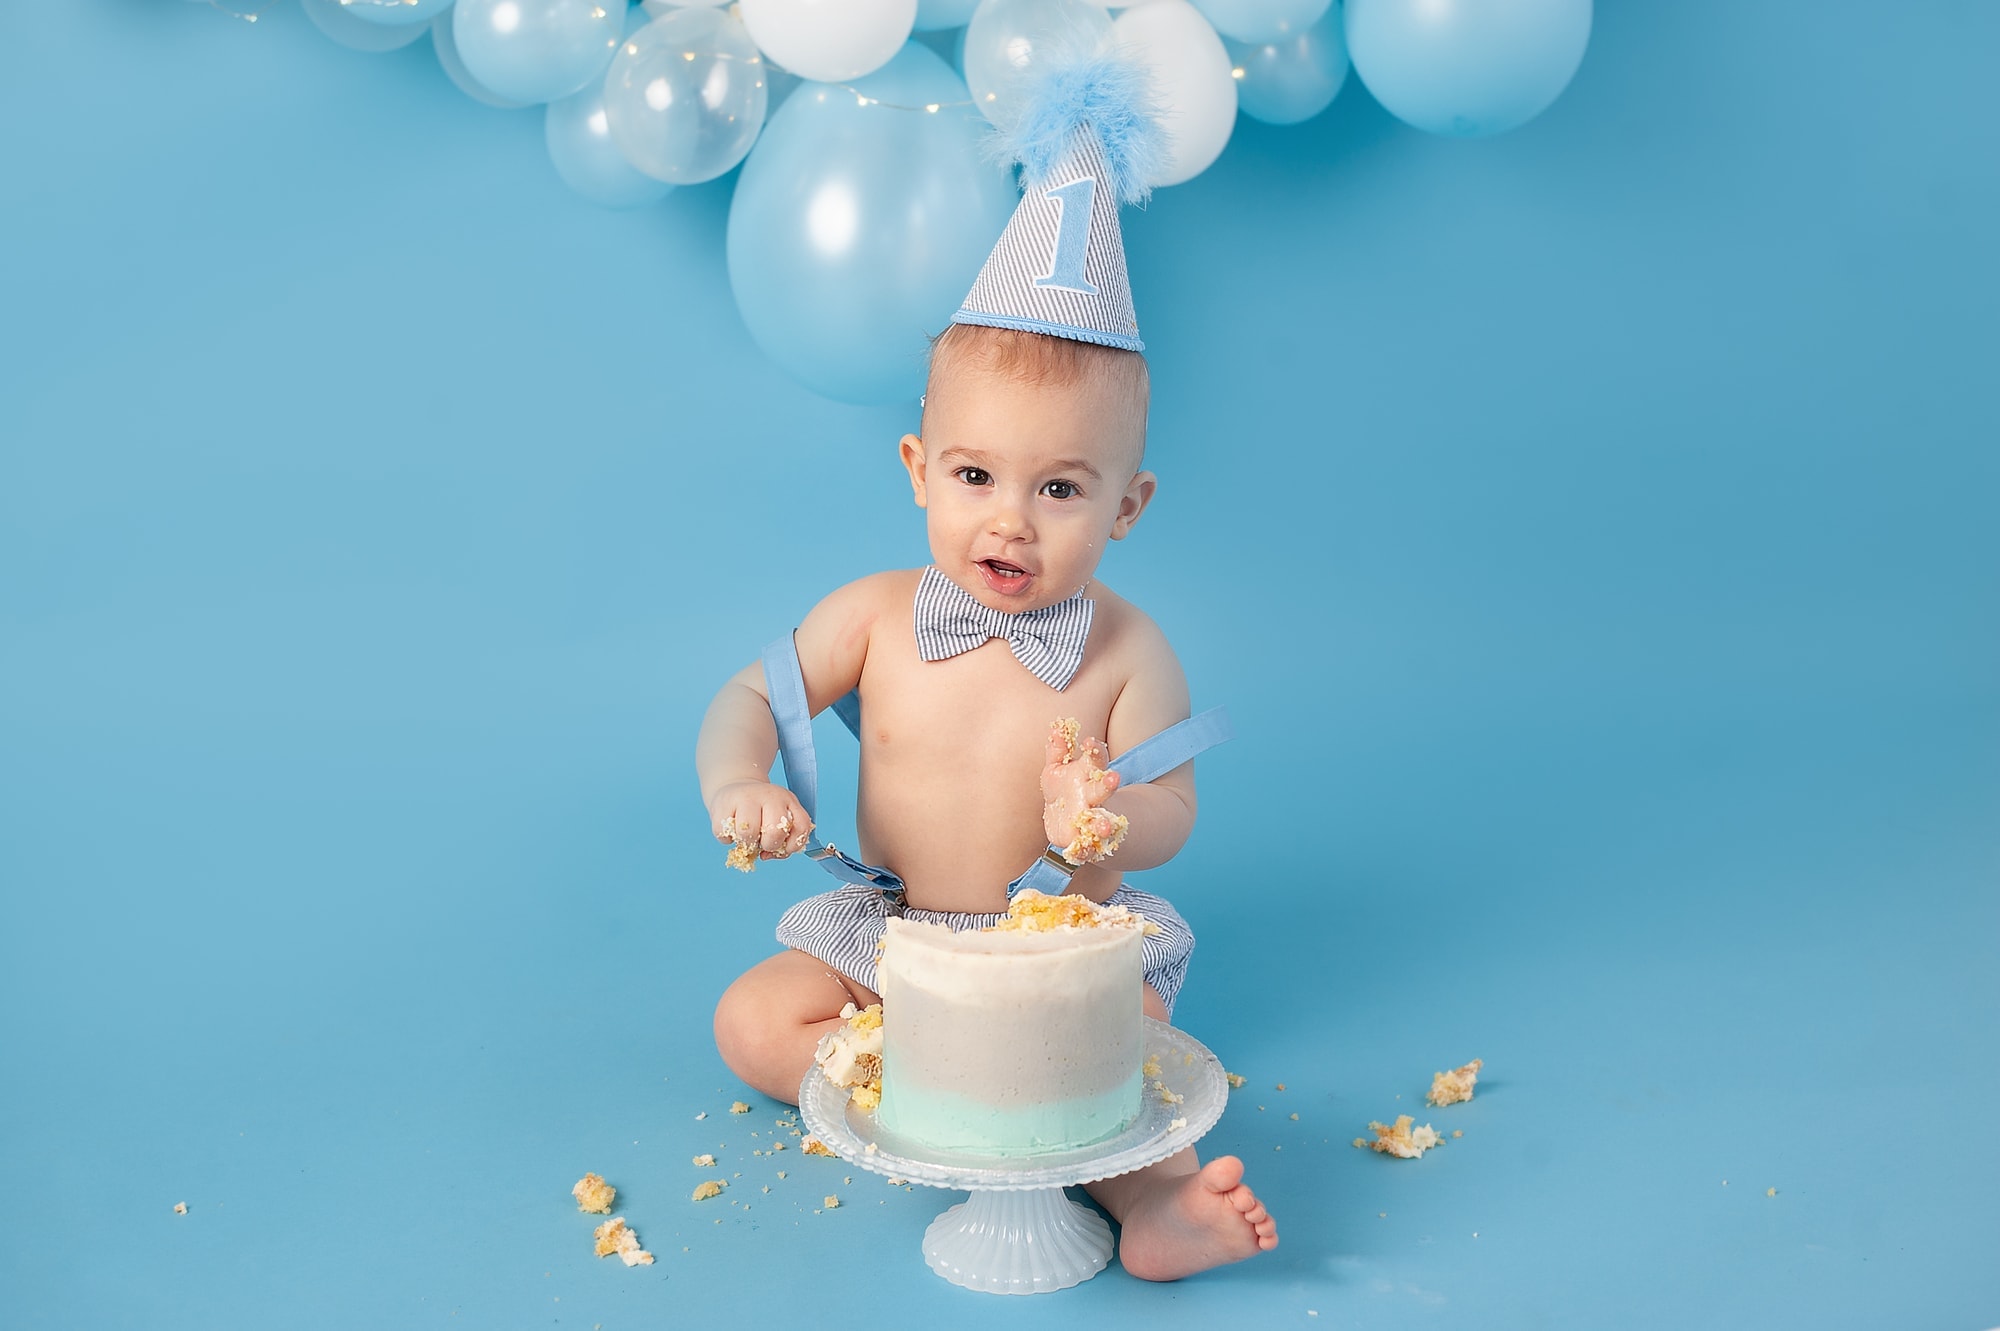 cake smash, pricing, how much, blue, ombre cake, cake smash outfit, party hat, balloon garland, blue, white, orpington, bromley